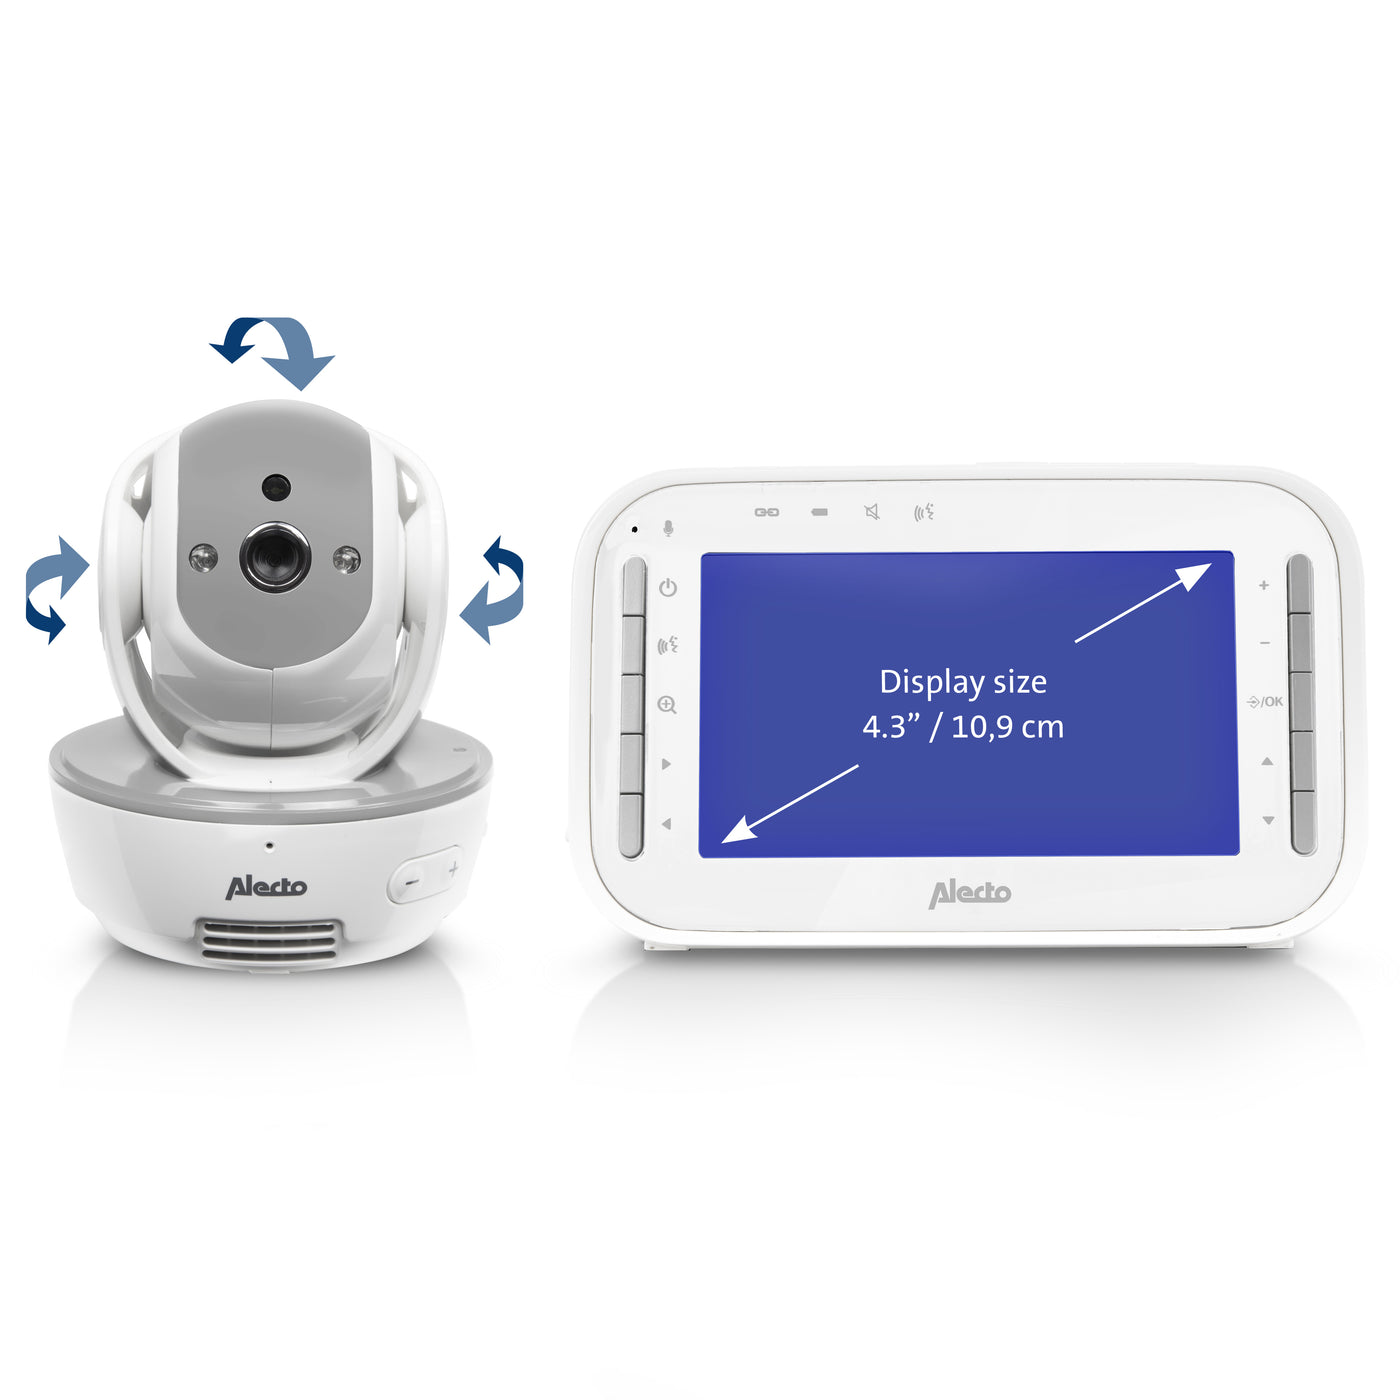 Alecto DVM200MGS - Video baby monitor with 4.3" colour display, white/grey